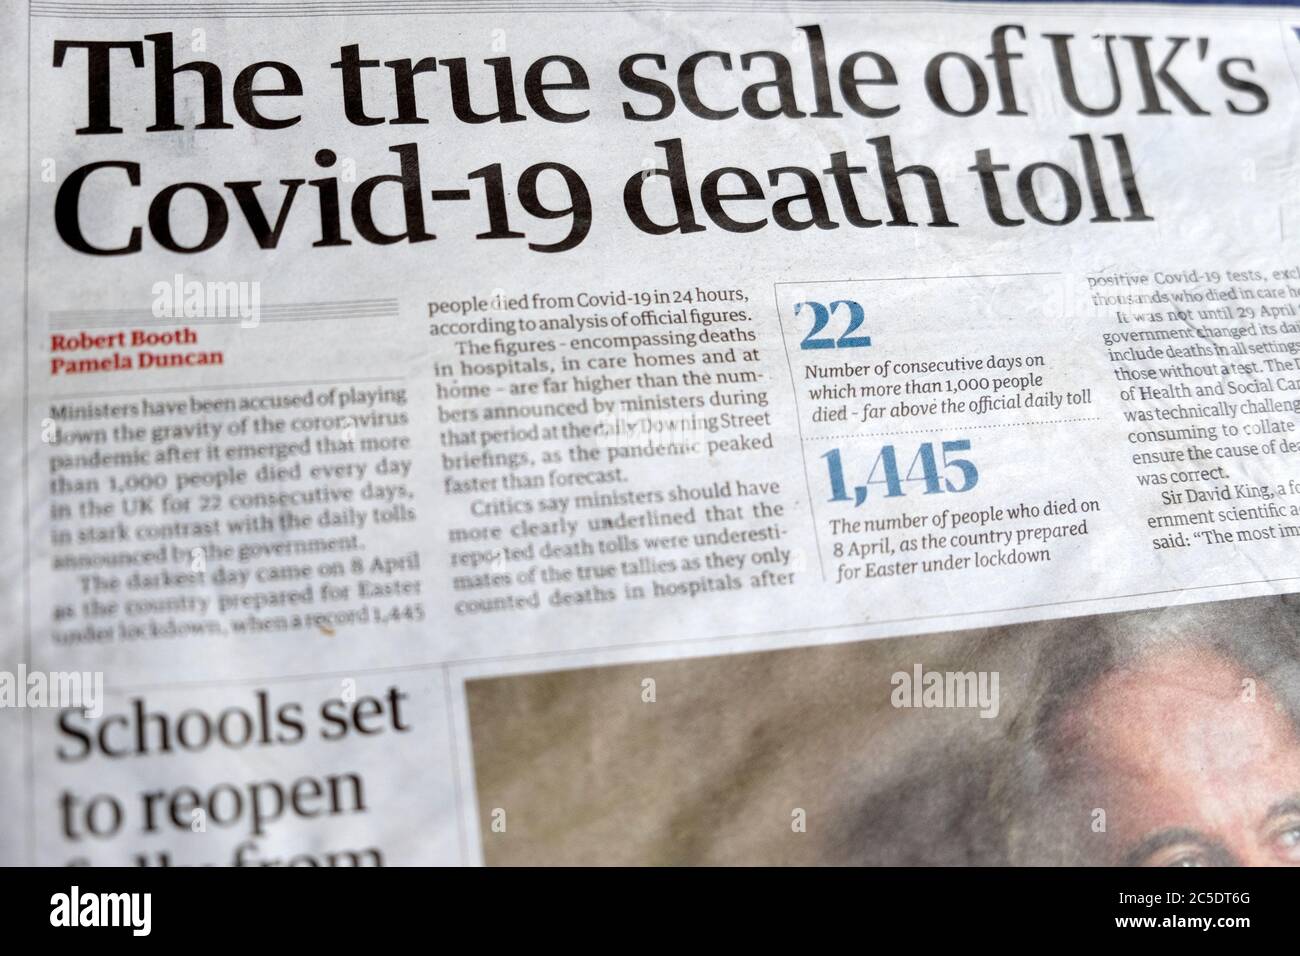 'The true scale of UK's Covid-19 death toll' newspaper headline on front page of the Guardian  20 June 2020 London England UK Stock Photo